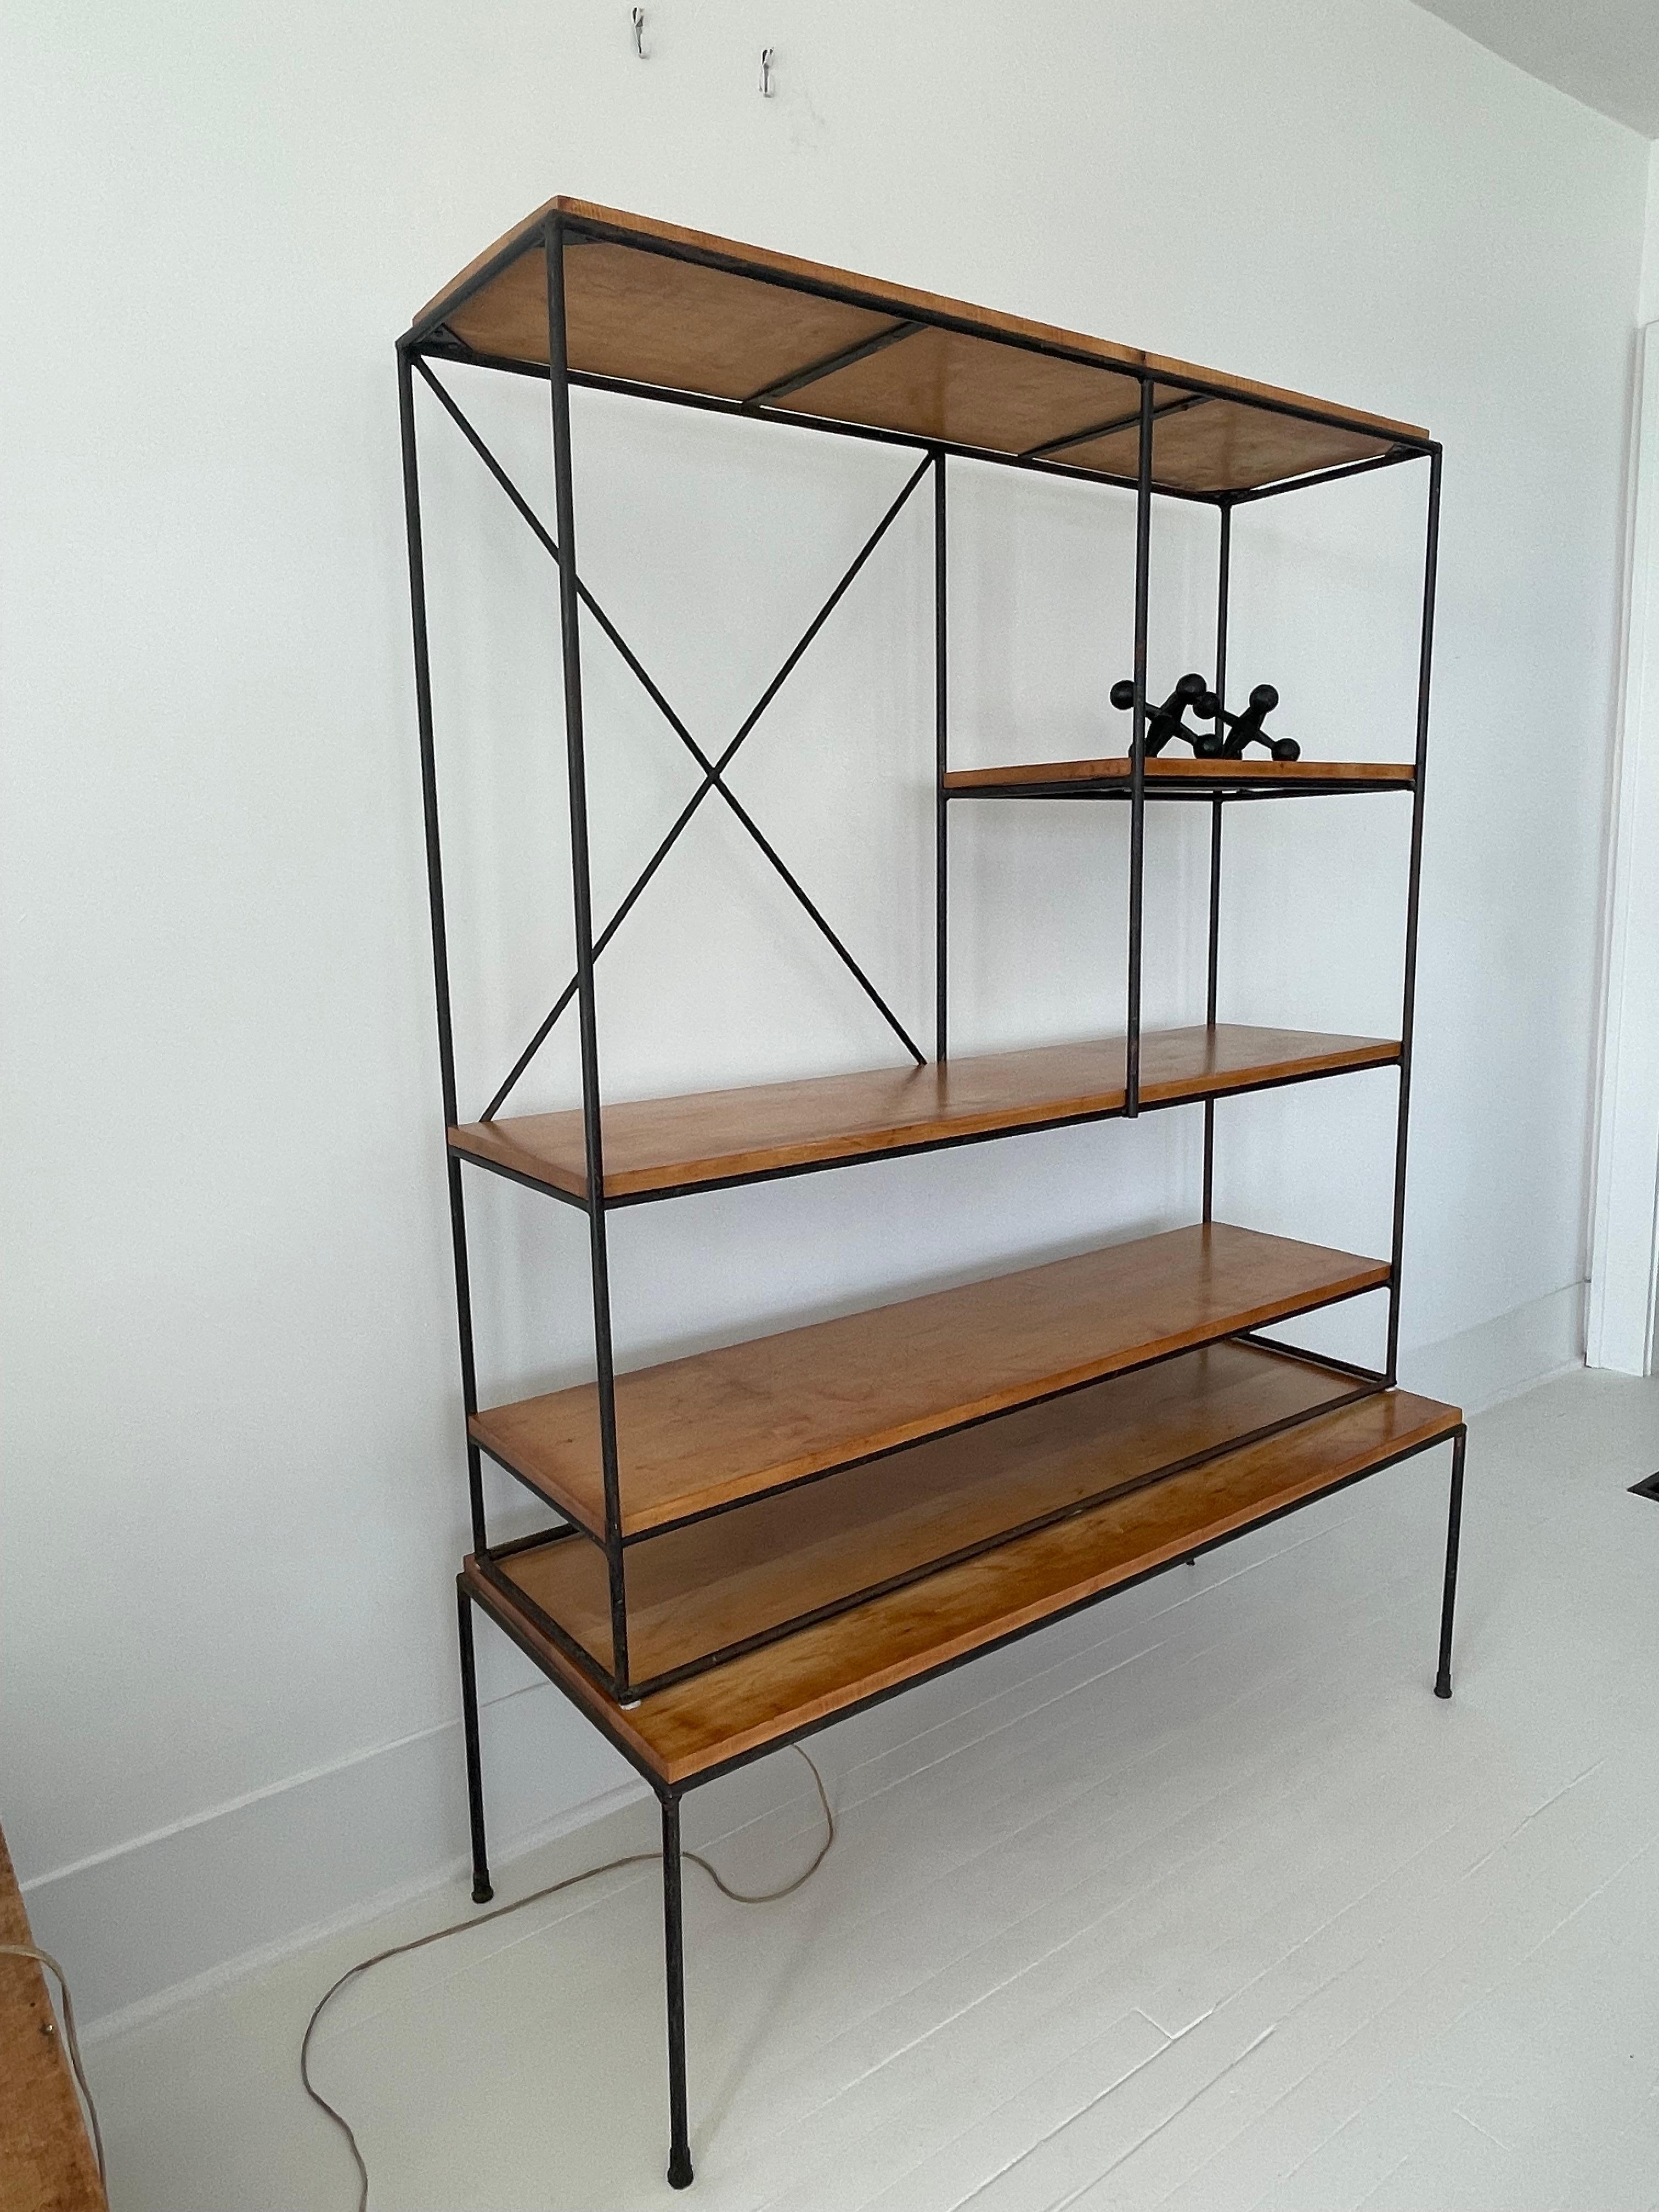 Gorgeous Mid Century two piece shelving system by Paul McCobb and part of the “Planner Group” manufactured by Winchendon in the 1950s. Original maple wood shelves and black wrought iron frame . Pieces can be used together or separate as shown in the